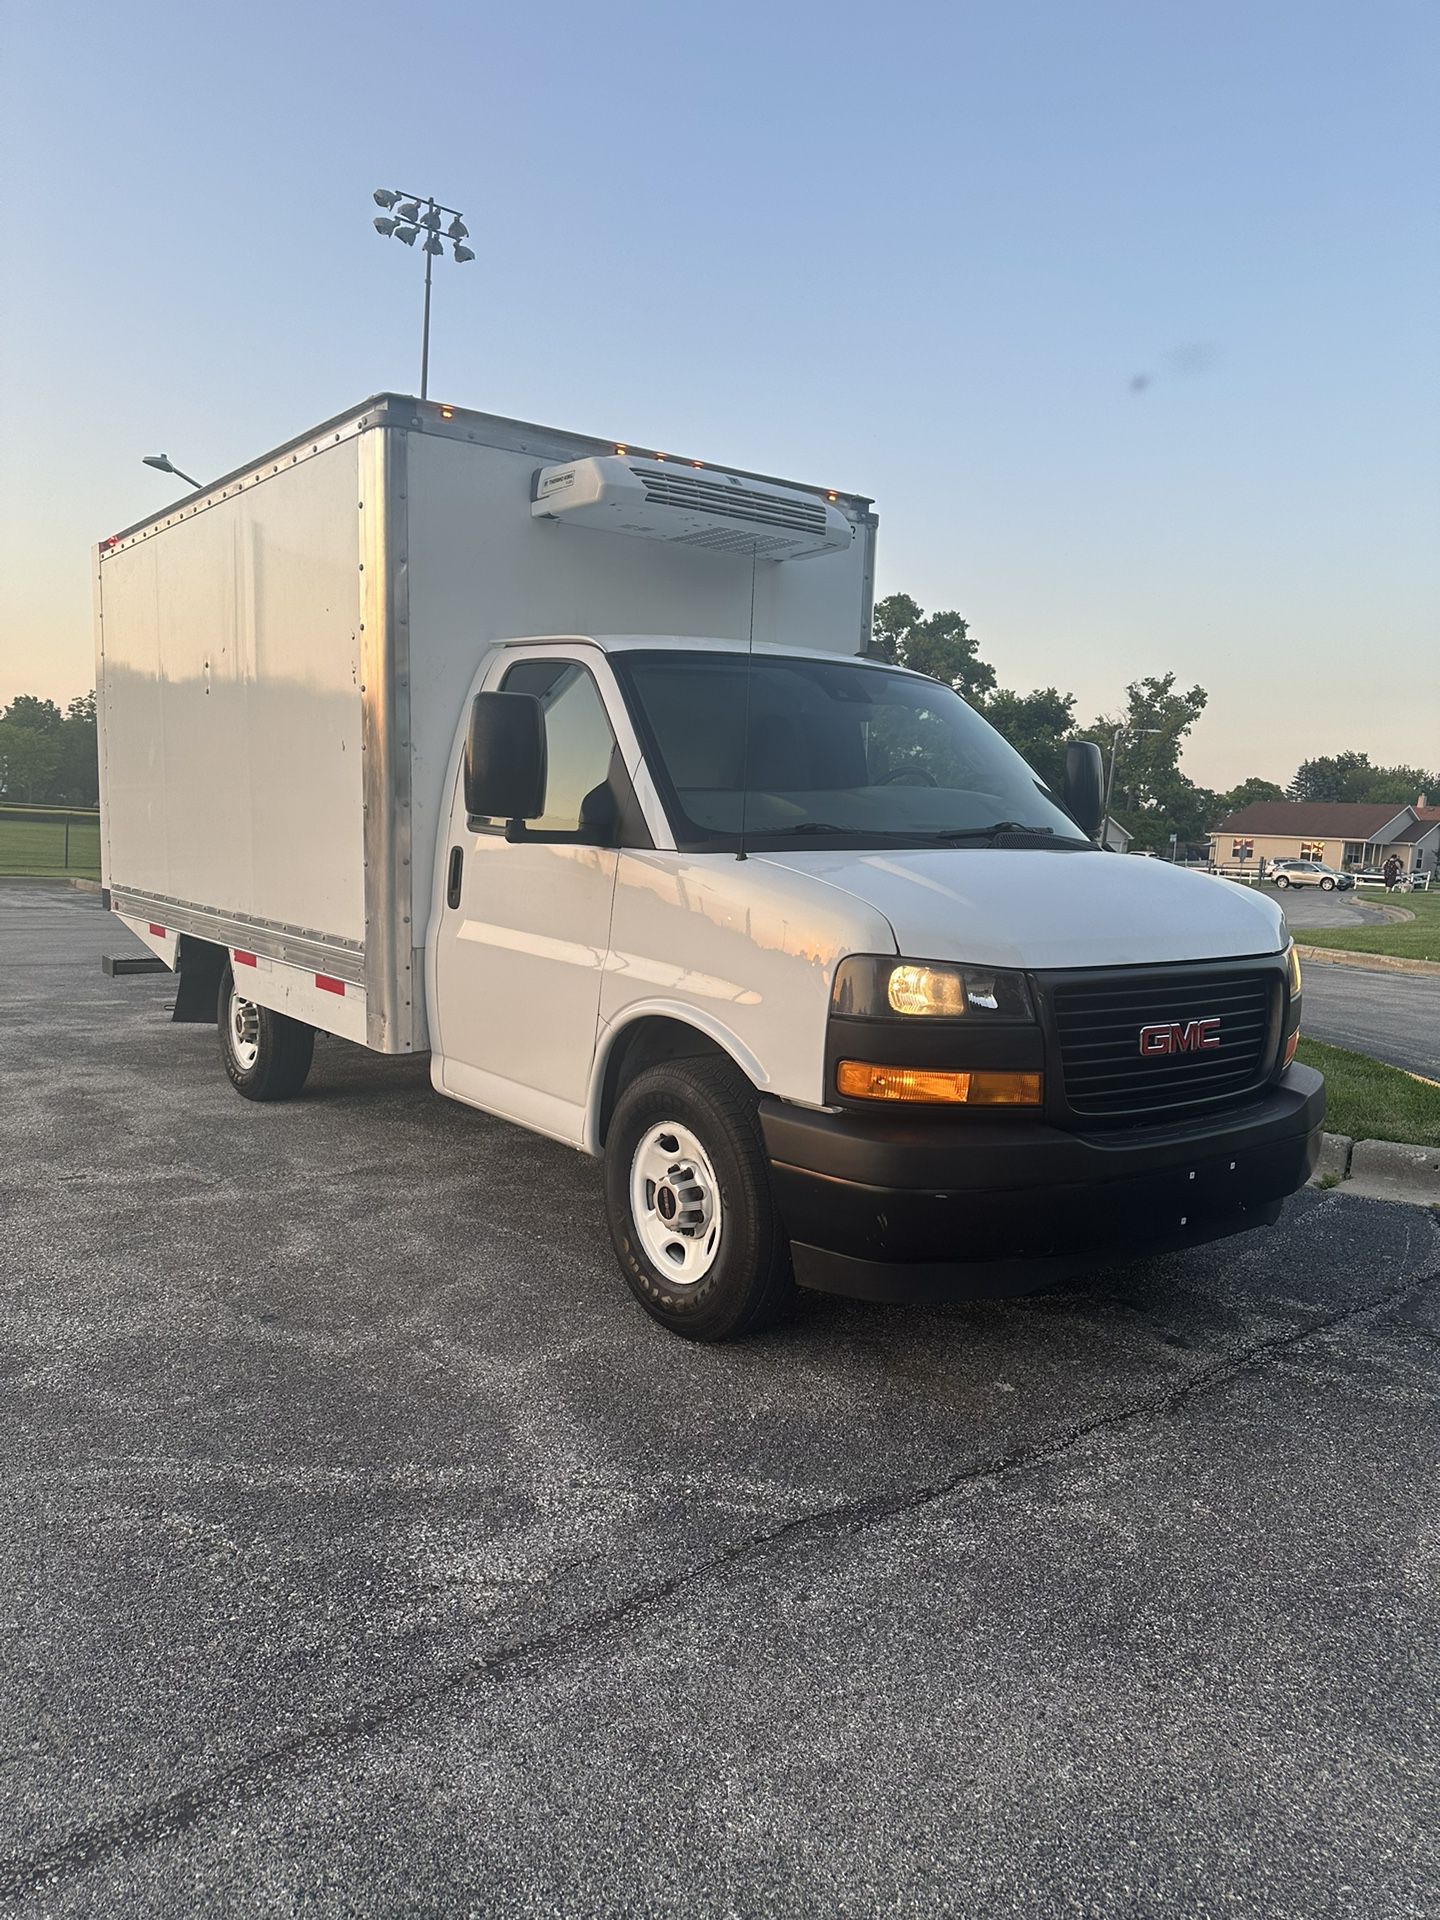 2019 GMC 3500 Reefer ThermoKing